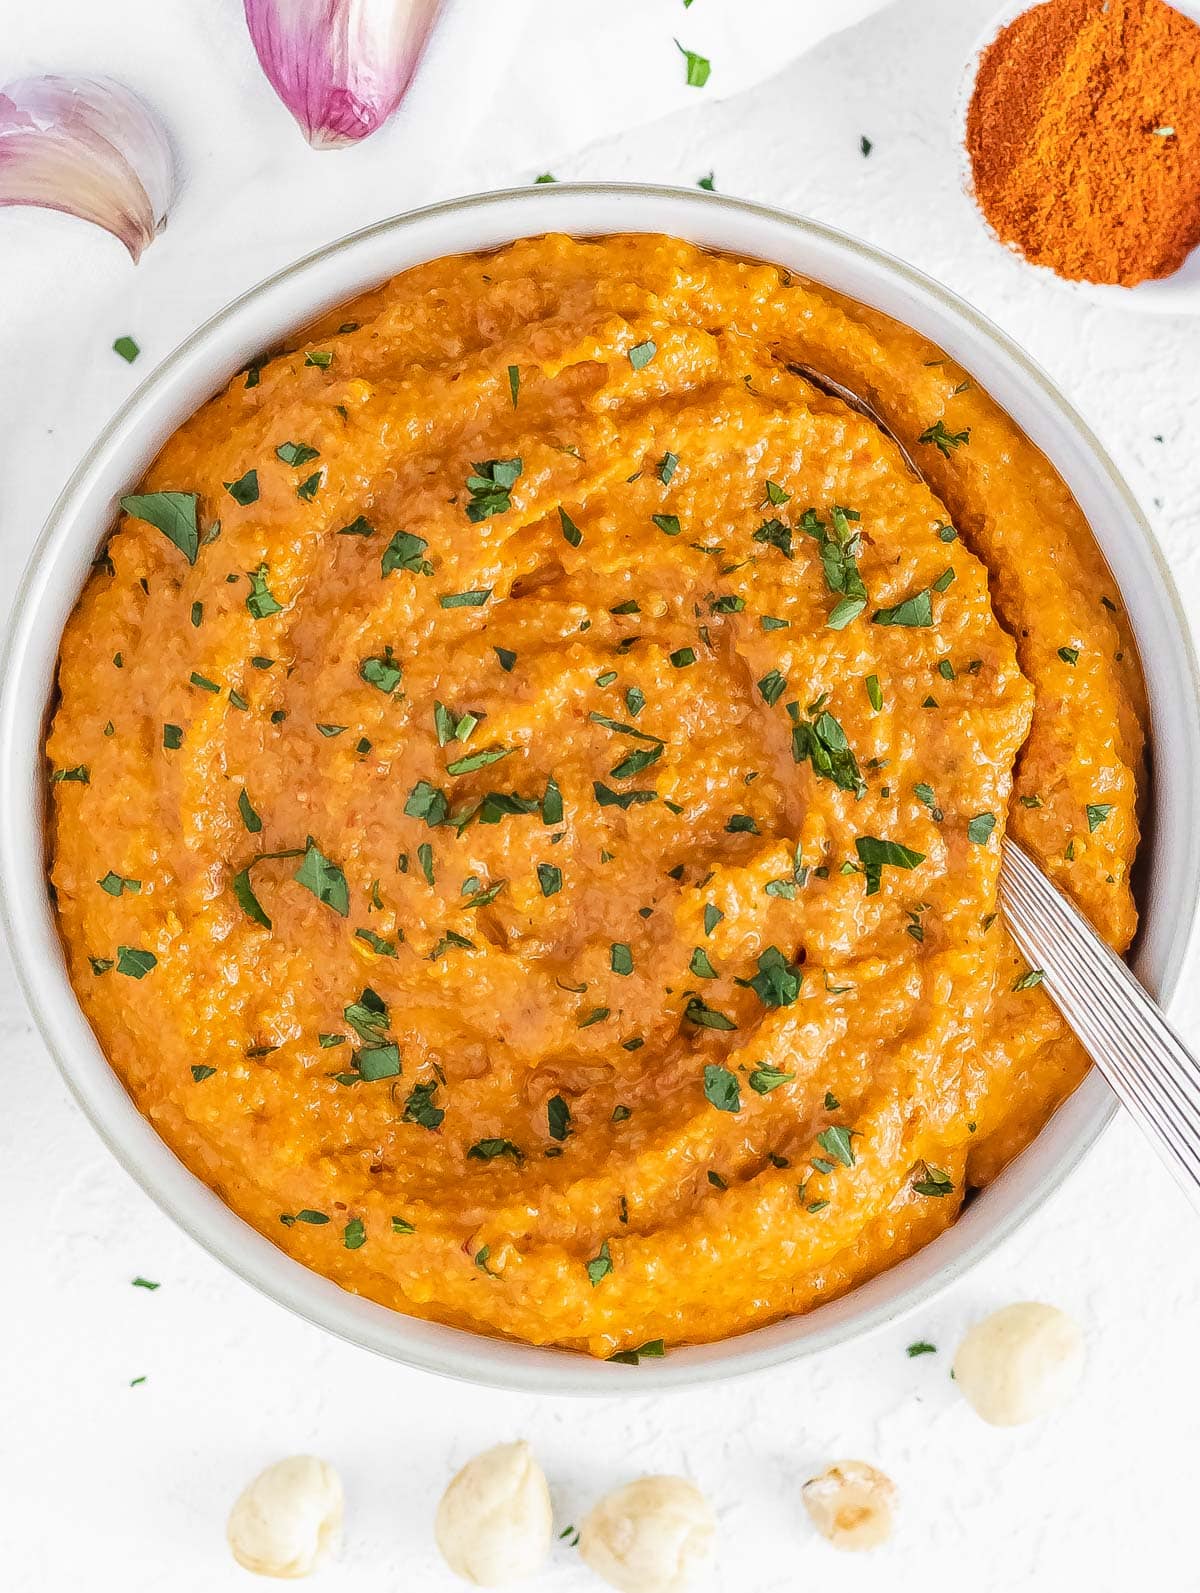 romesco sauce with parsley on top